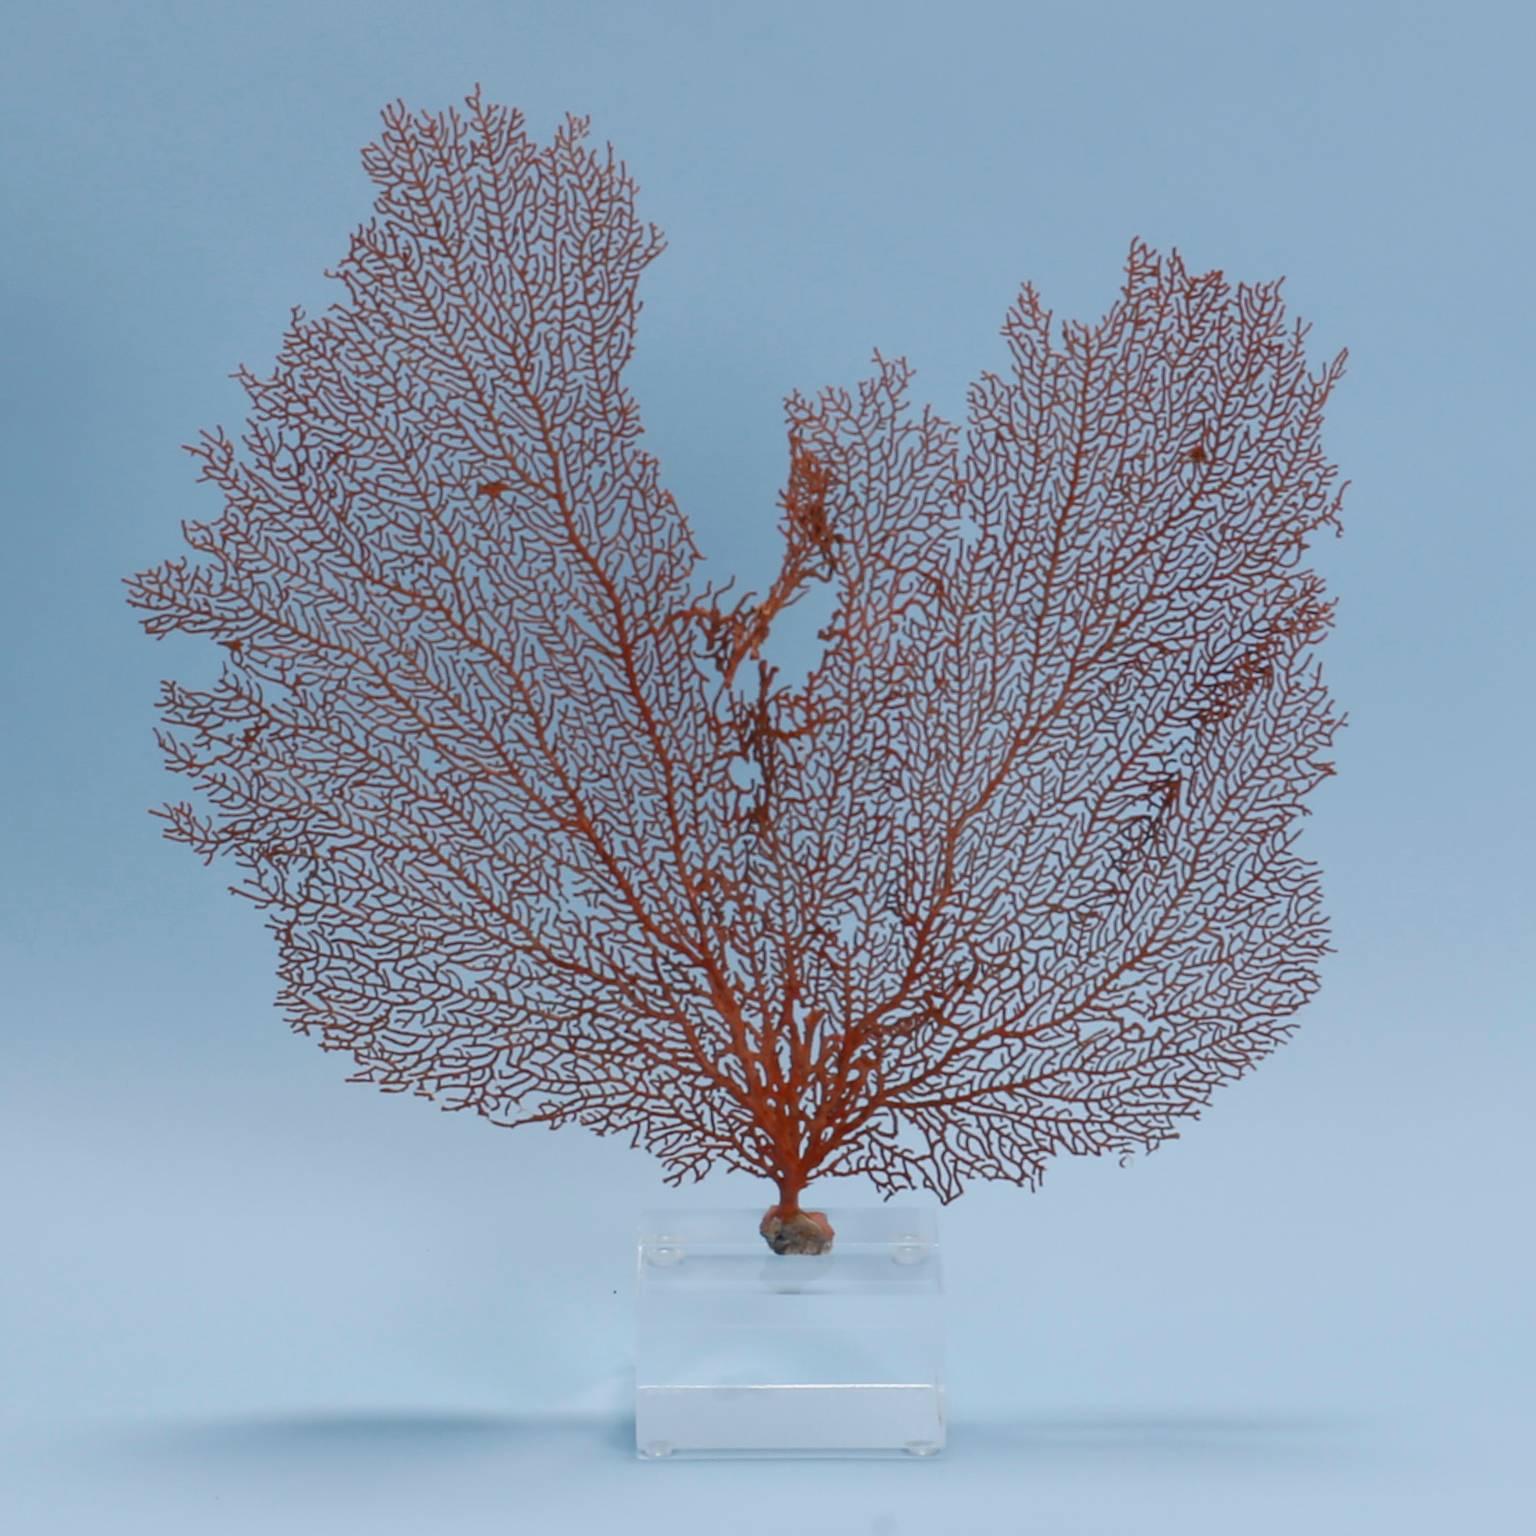 Just like snow flakes, no two sea fans are alike. Here we present on custom Lucite stands three different species of sea fans each with its own personality, color, and form.

From left to right:

Measures: H 17 x W 15 x D 4, $600.00
H 14 x W 14